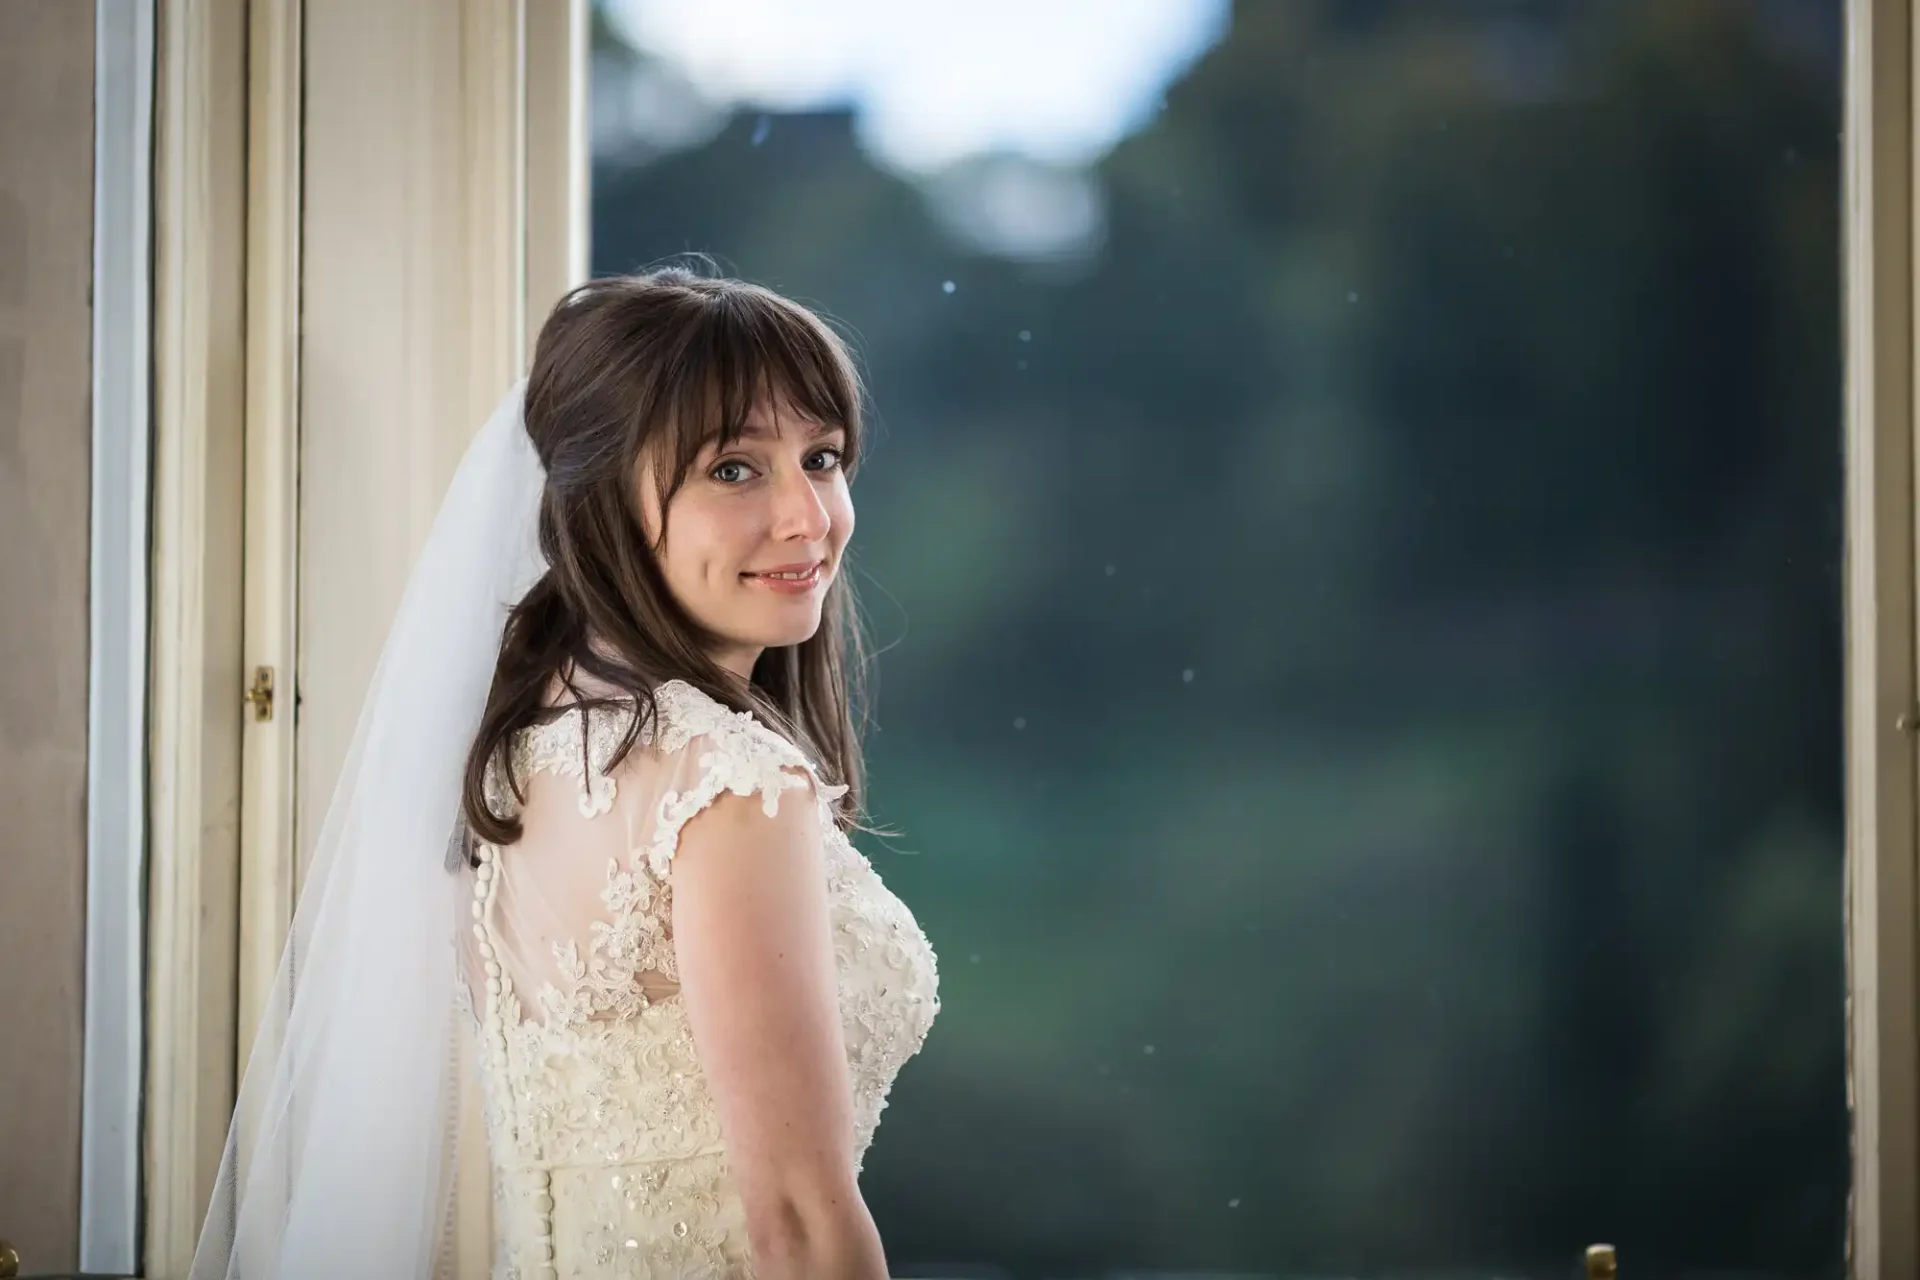 A bride in a lace wedding dress smiling over her shoulder near an open door, with a blurred green background.